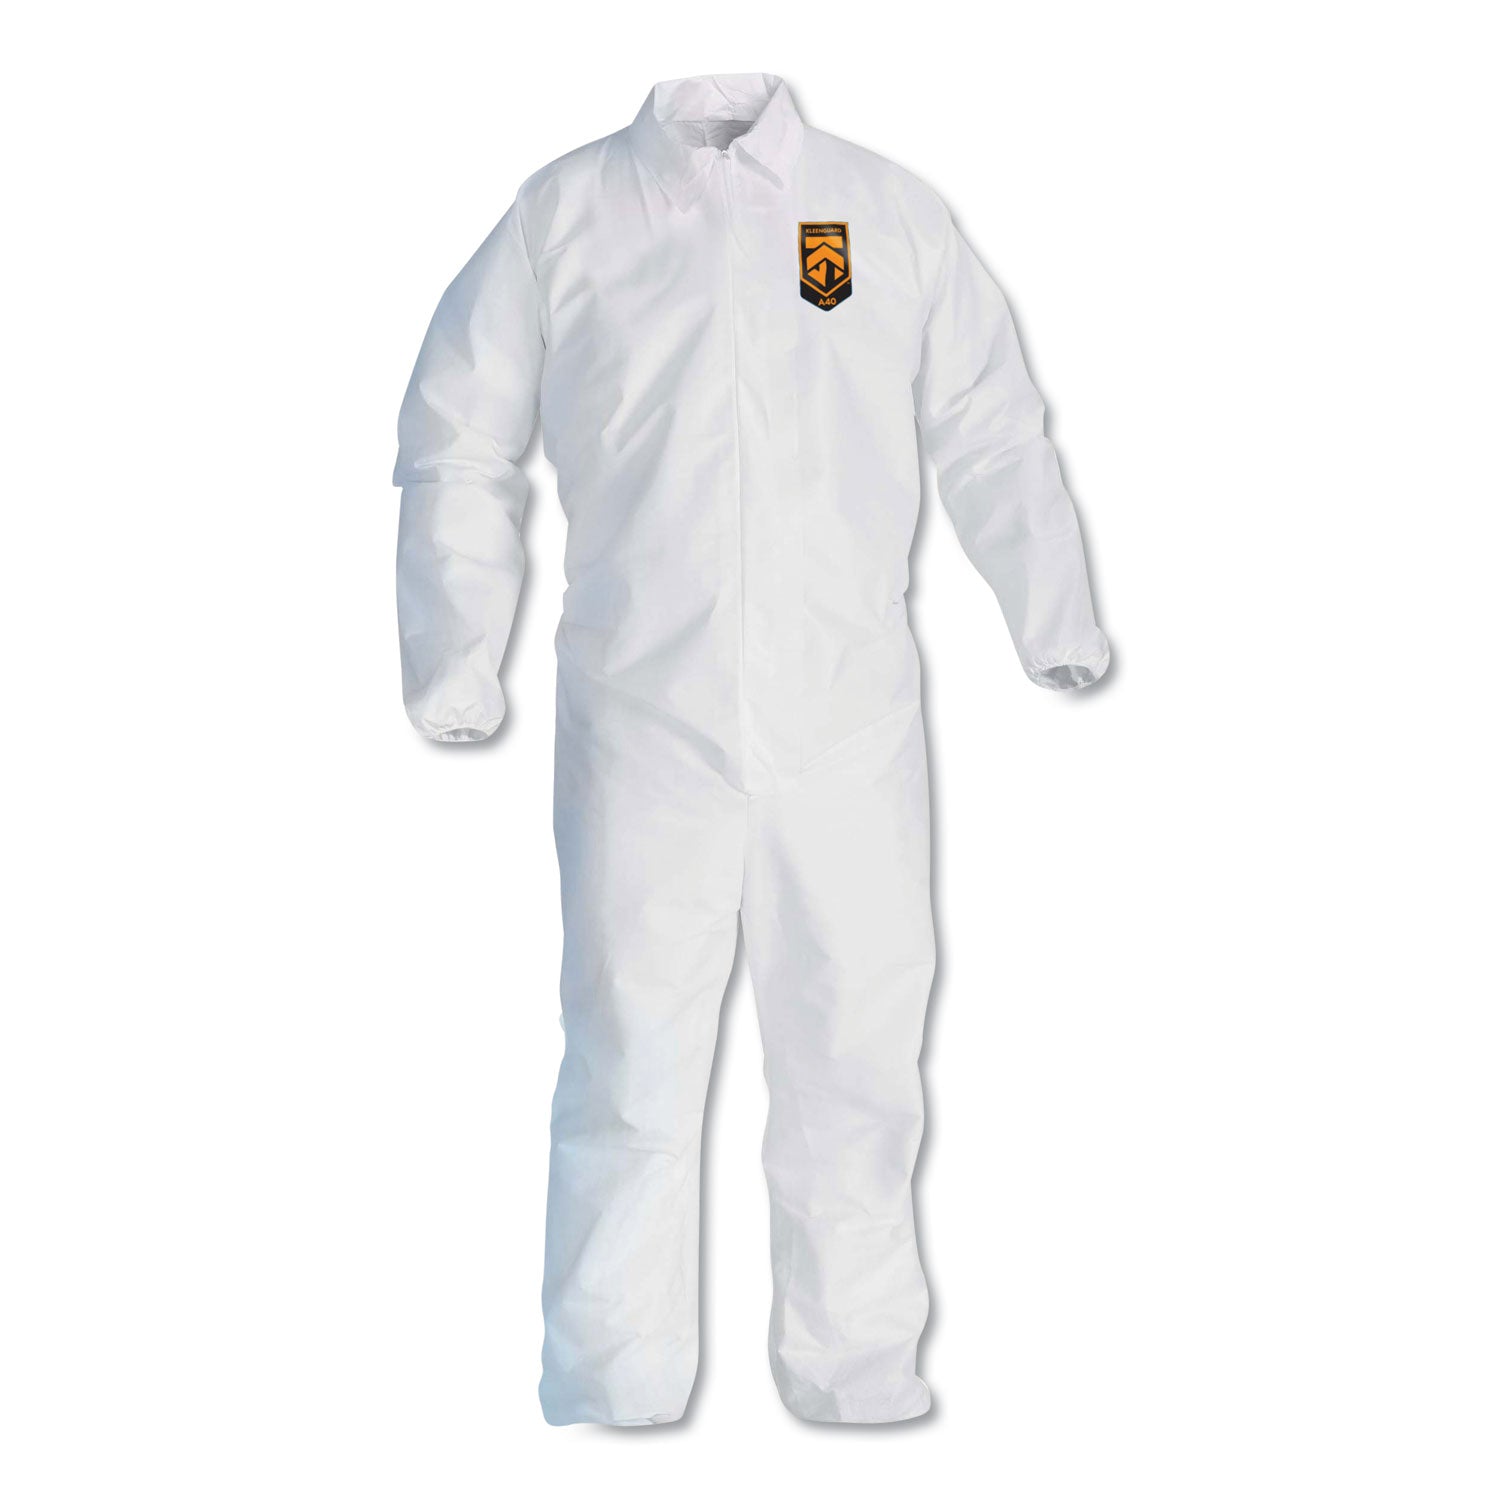 a40-coveralls-elastic-wrists-ankles-x-large-white_kcc44314 - 1